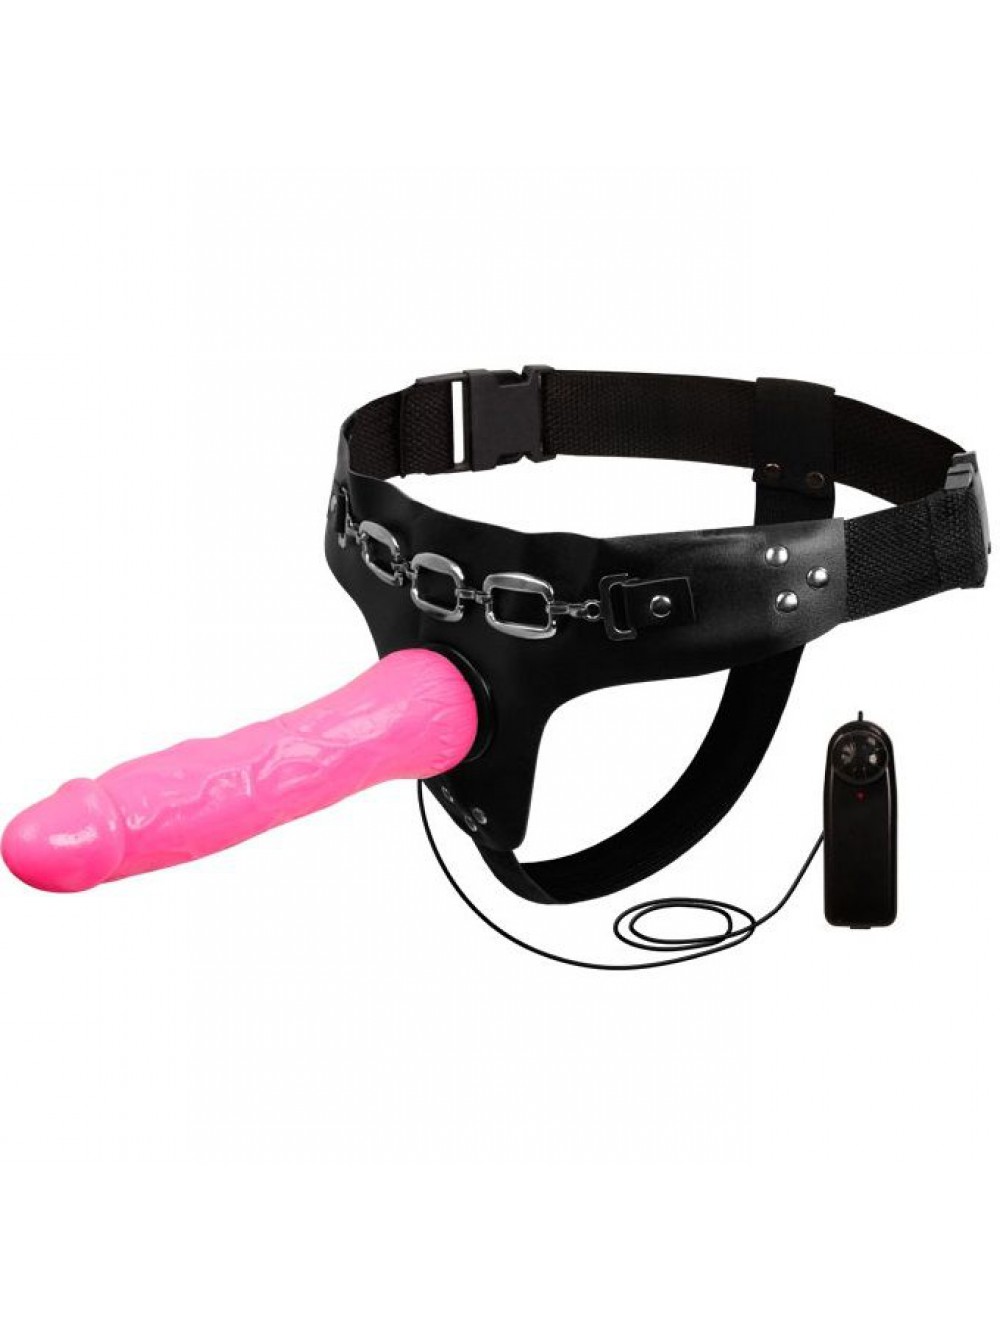 BAILE HARNESS HOT PINK 18.5CM